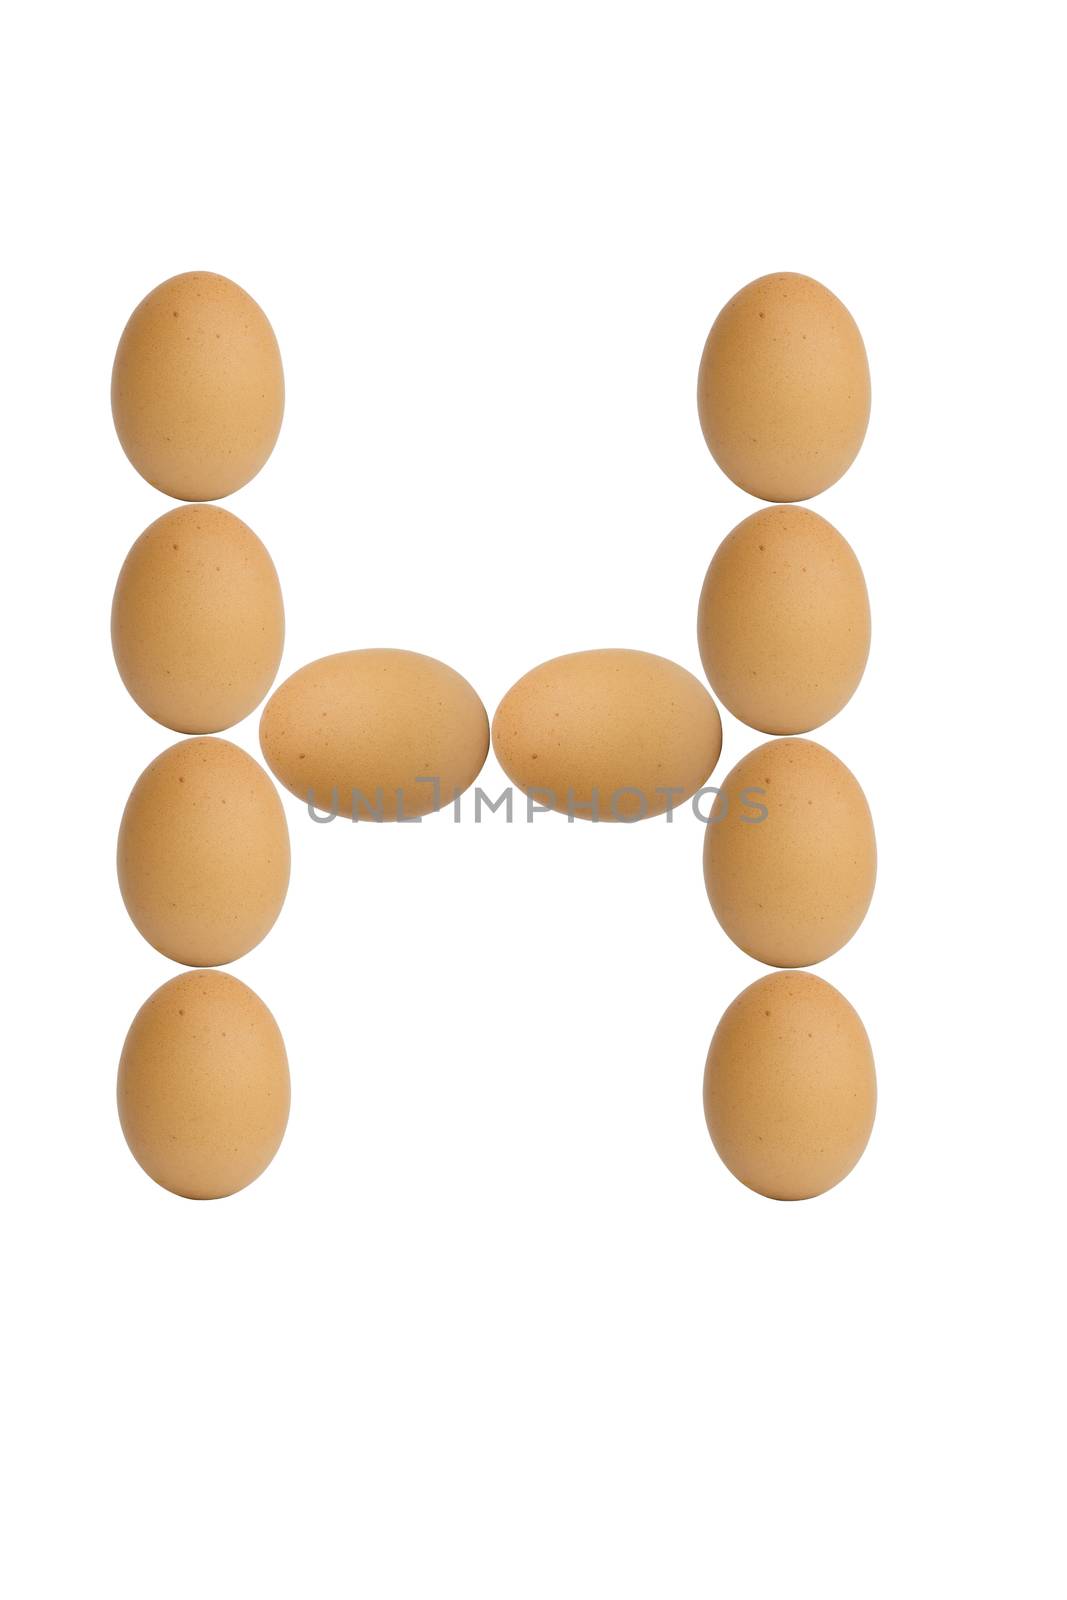 Alphabets  A to Z from brown eggs alphabet isolated on white background, H